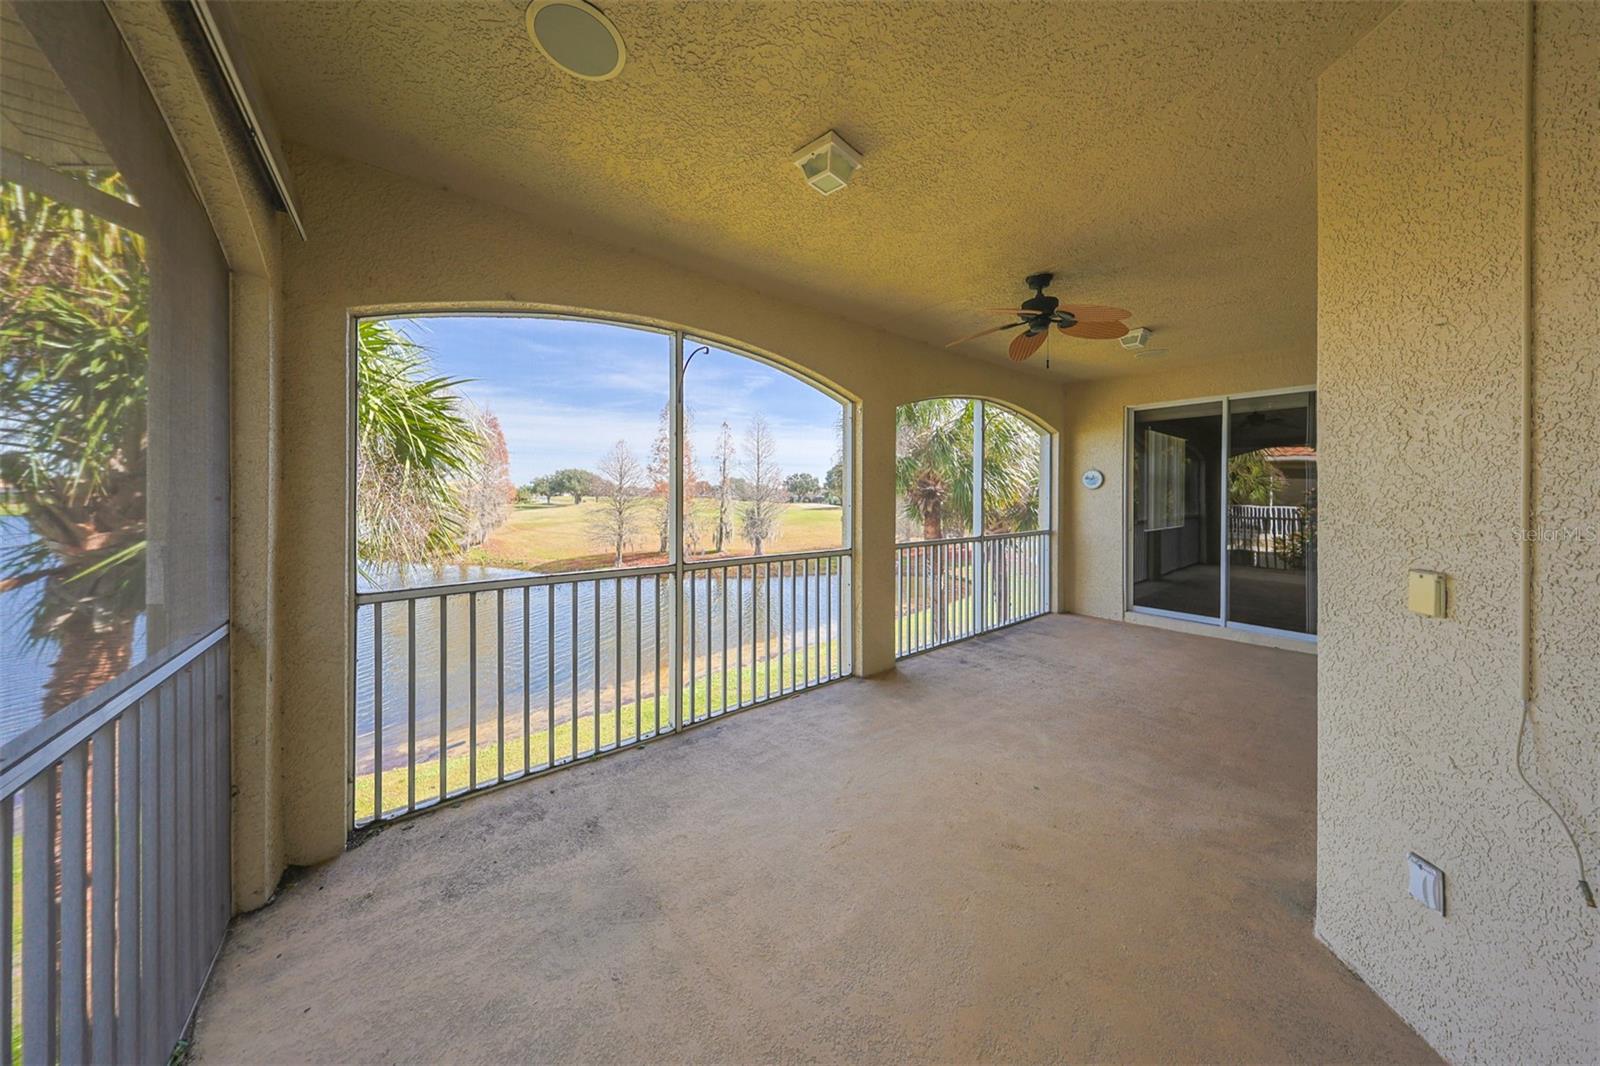 Corner unit with a large screened in patio with sliding glass doors from the dinette, great room and master bedroom.